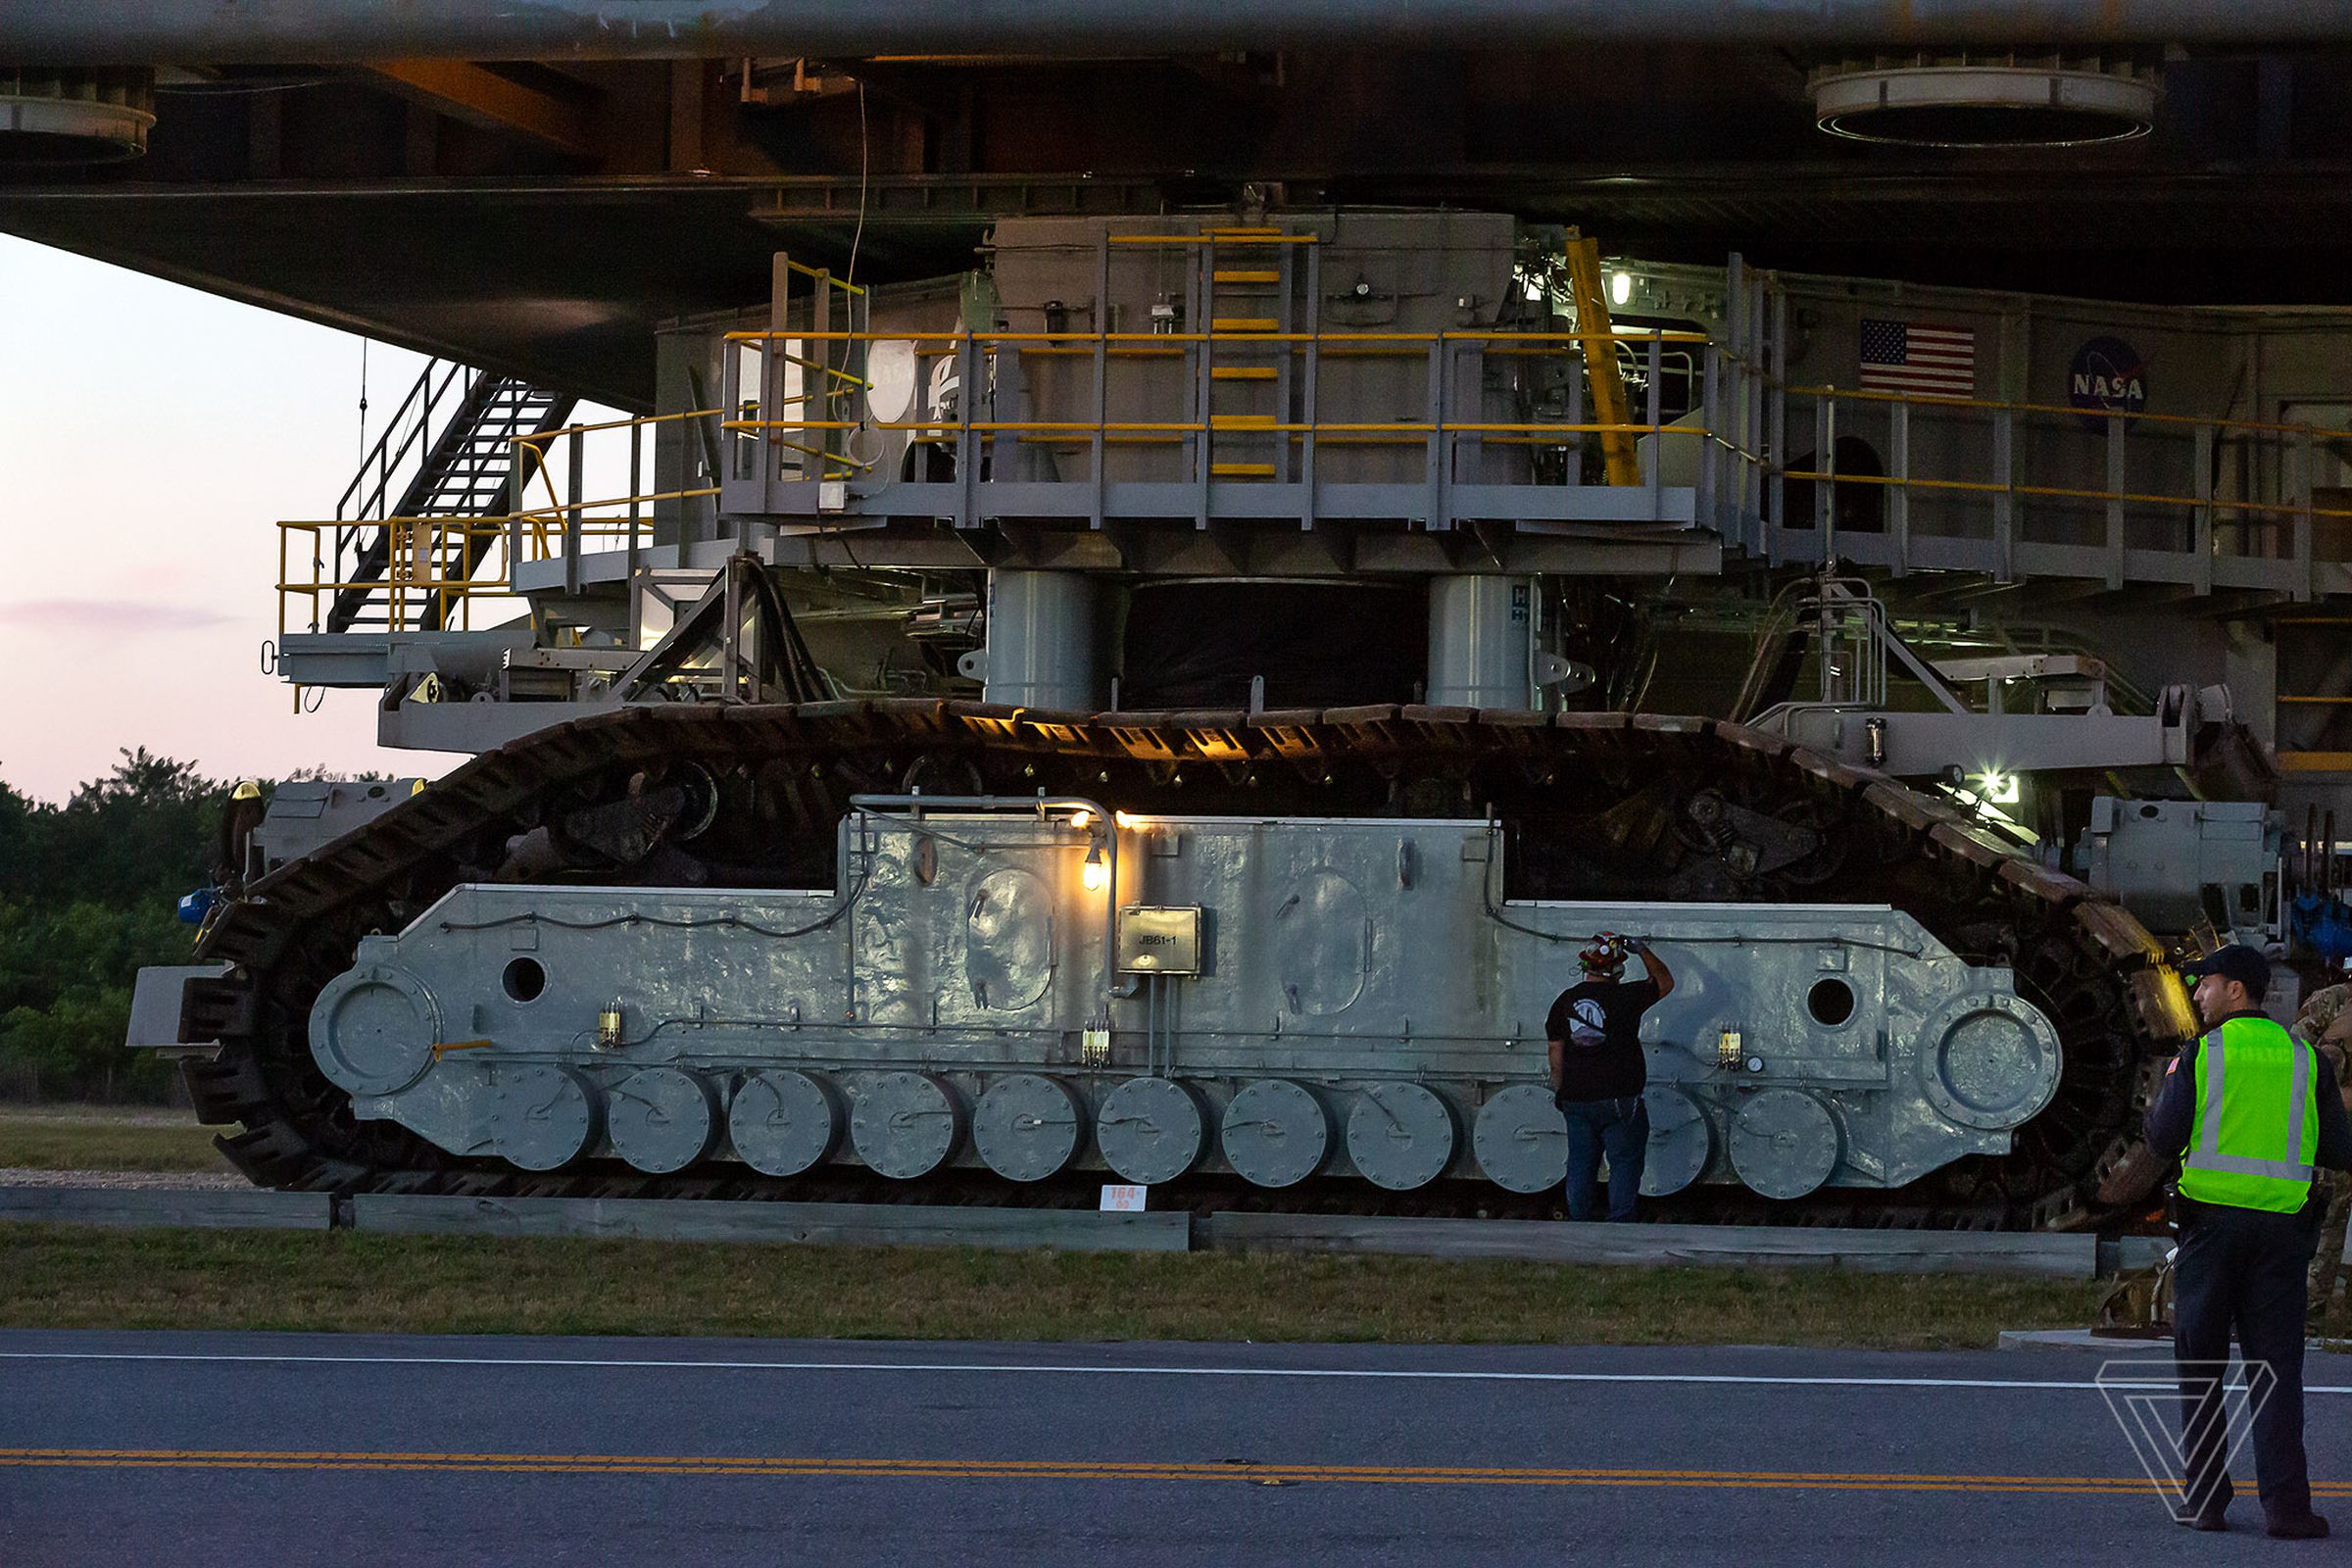 The massive treads of the crawler transporter that carries the SLS to the pad